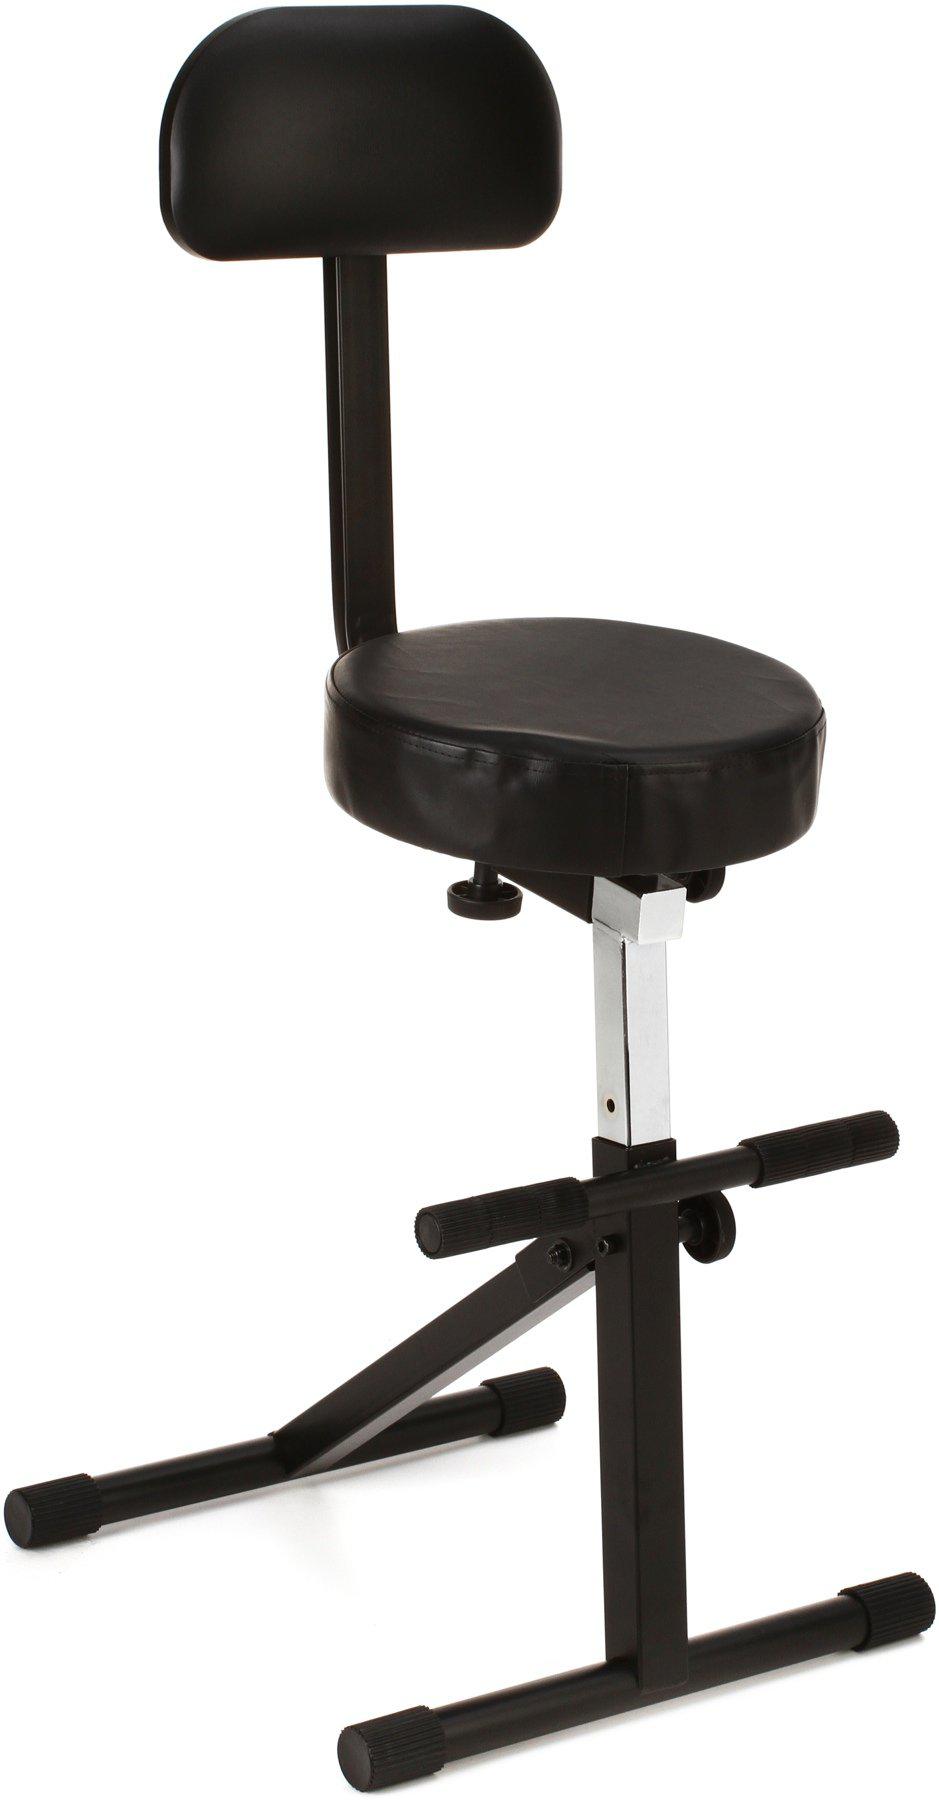 On-Stage Stands - Banco para Guitarrista o Tecladista Mod.DT8500_312